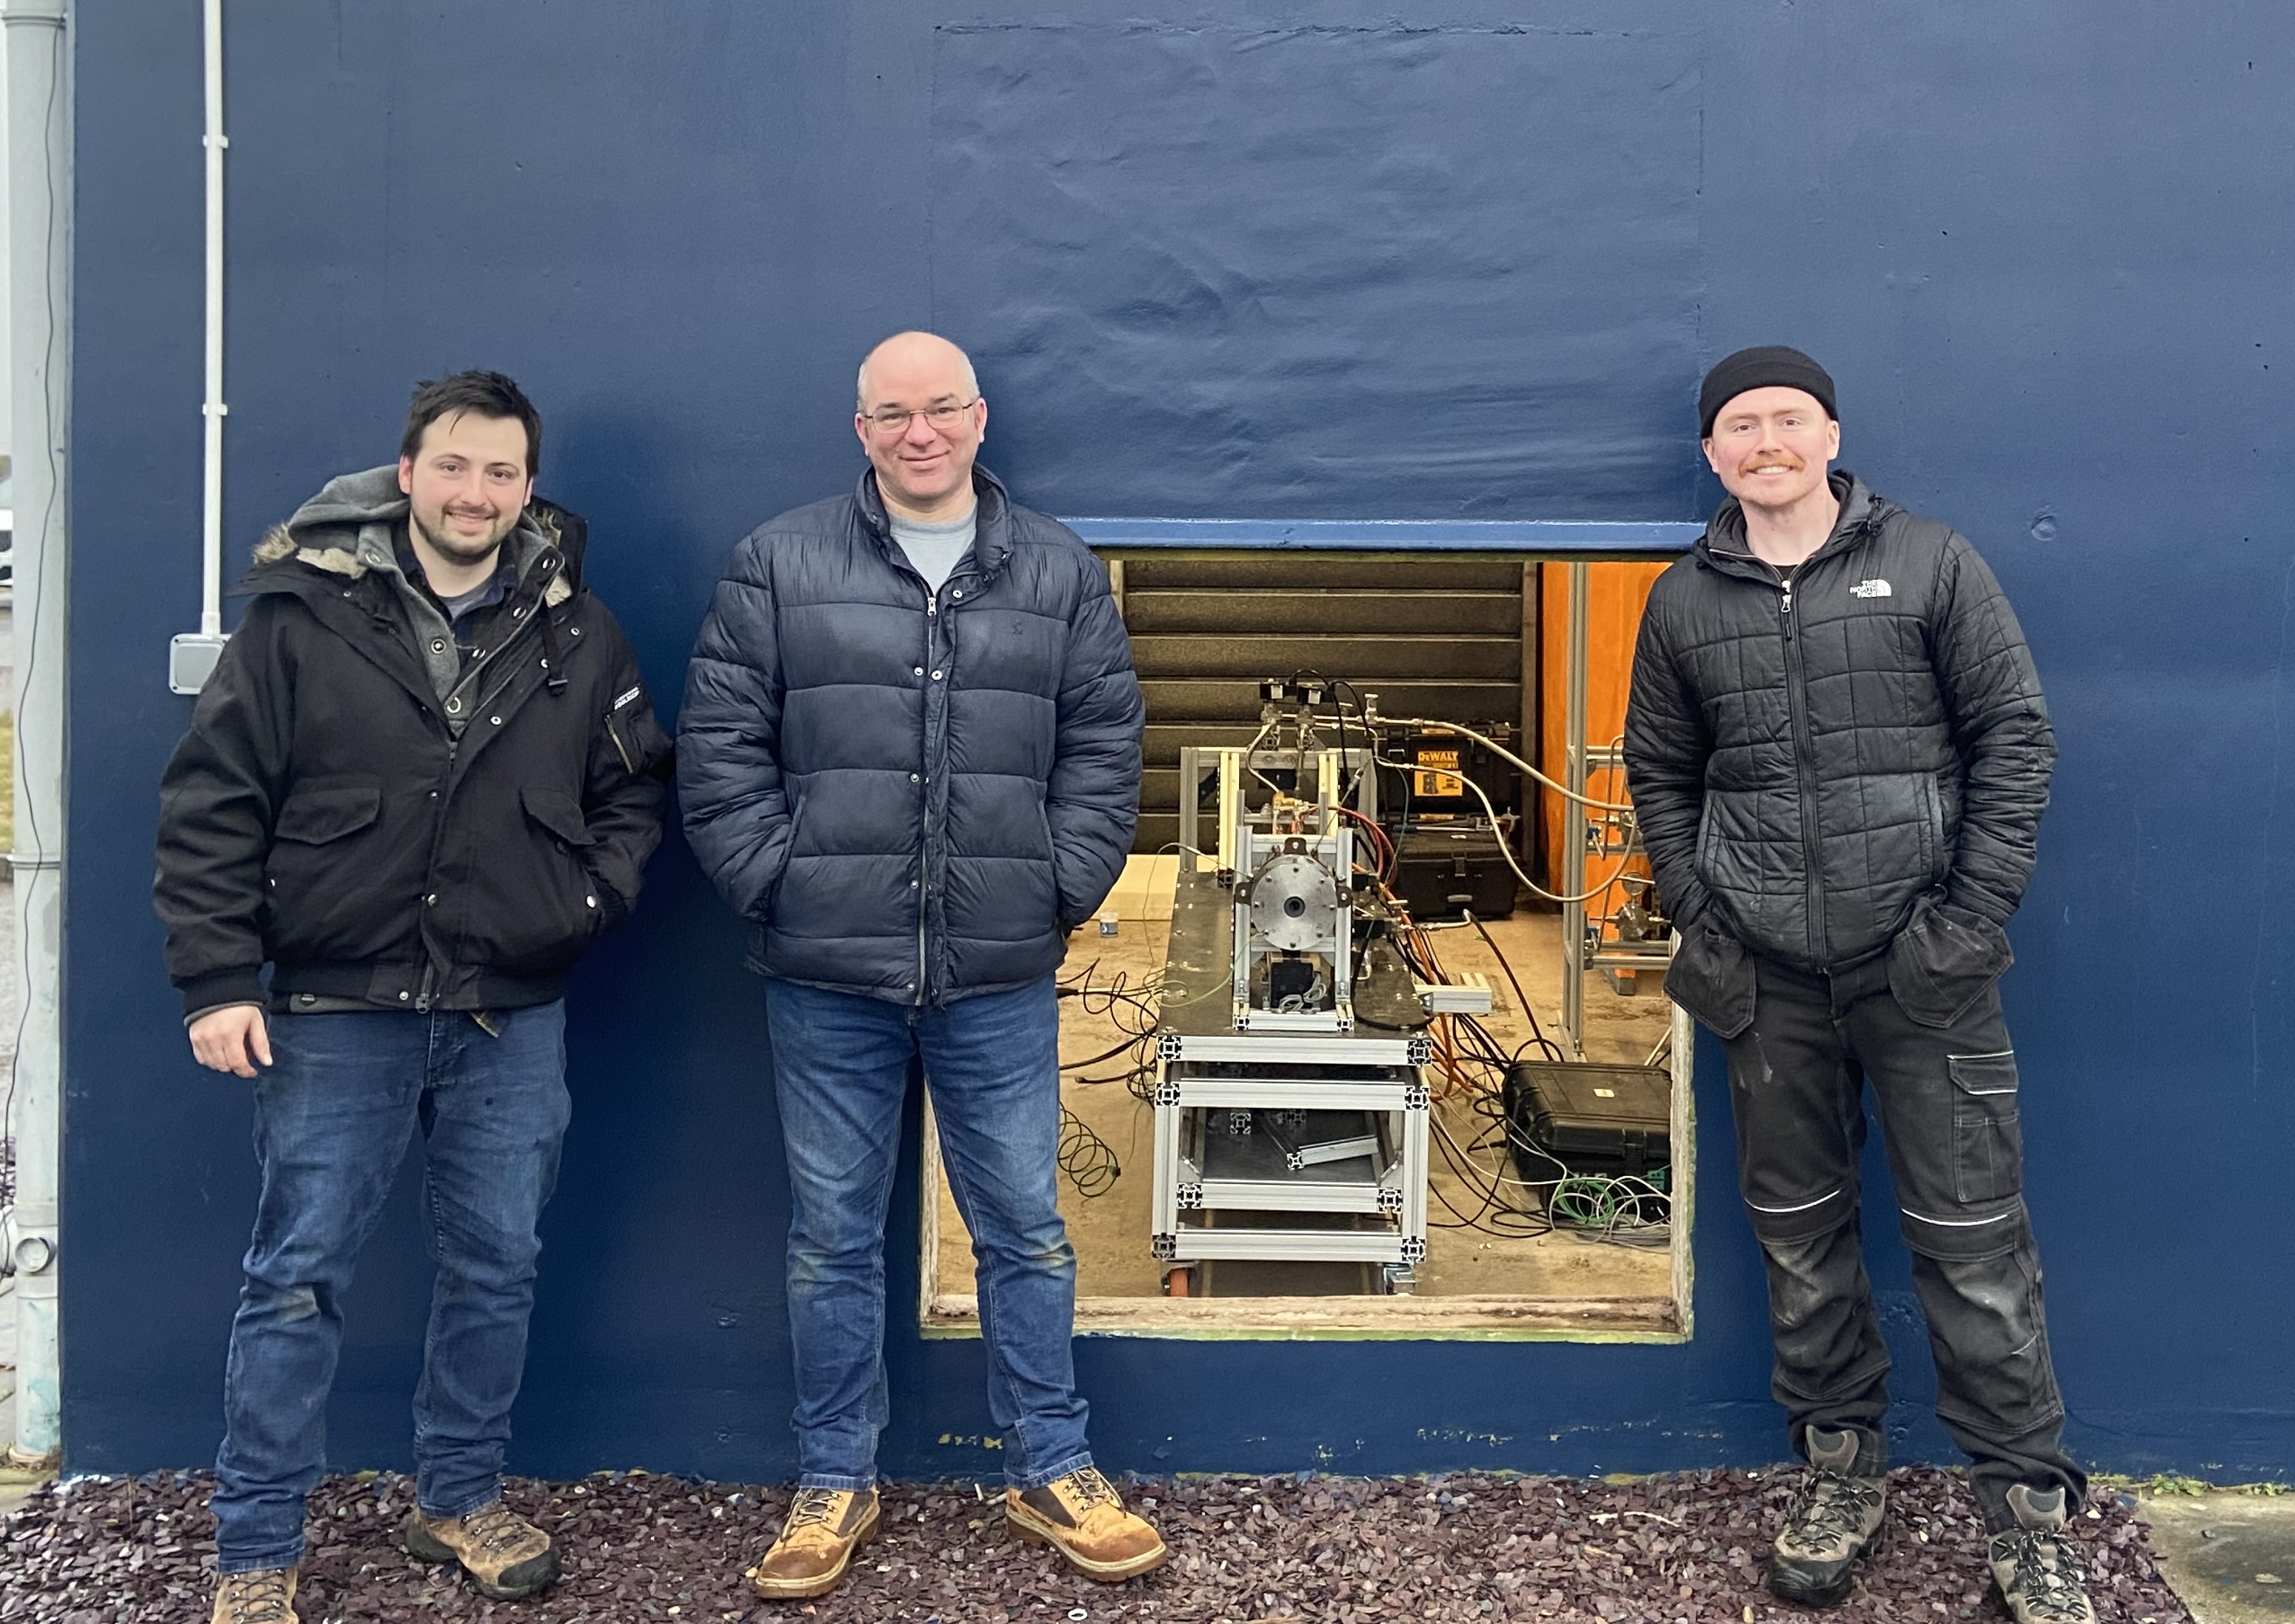 A picture of the research team behind the development of the autophage engine: (l-r) Krzysztof Bzdyk, Prof Patrick Harkness and Jack Tufft